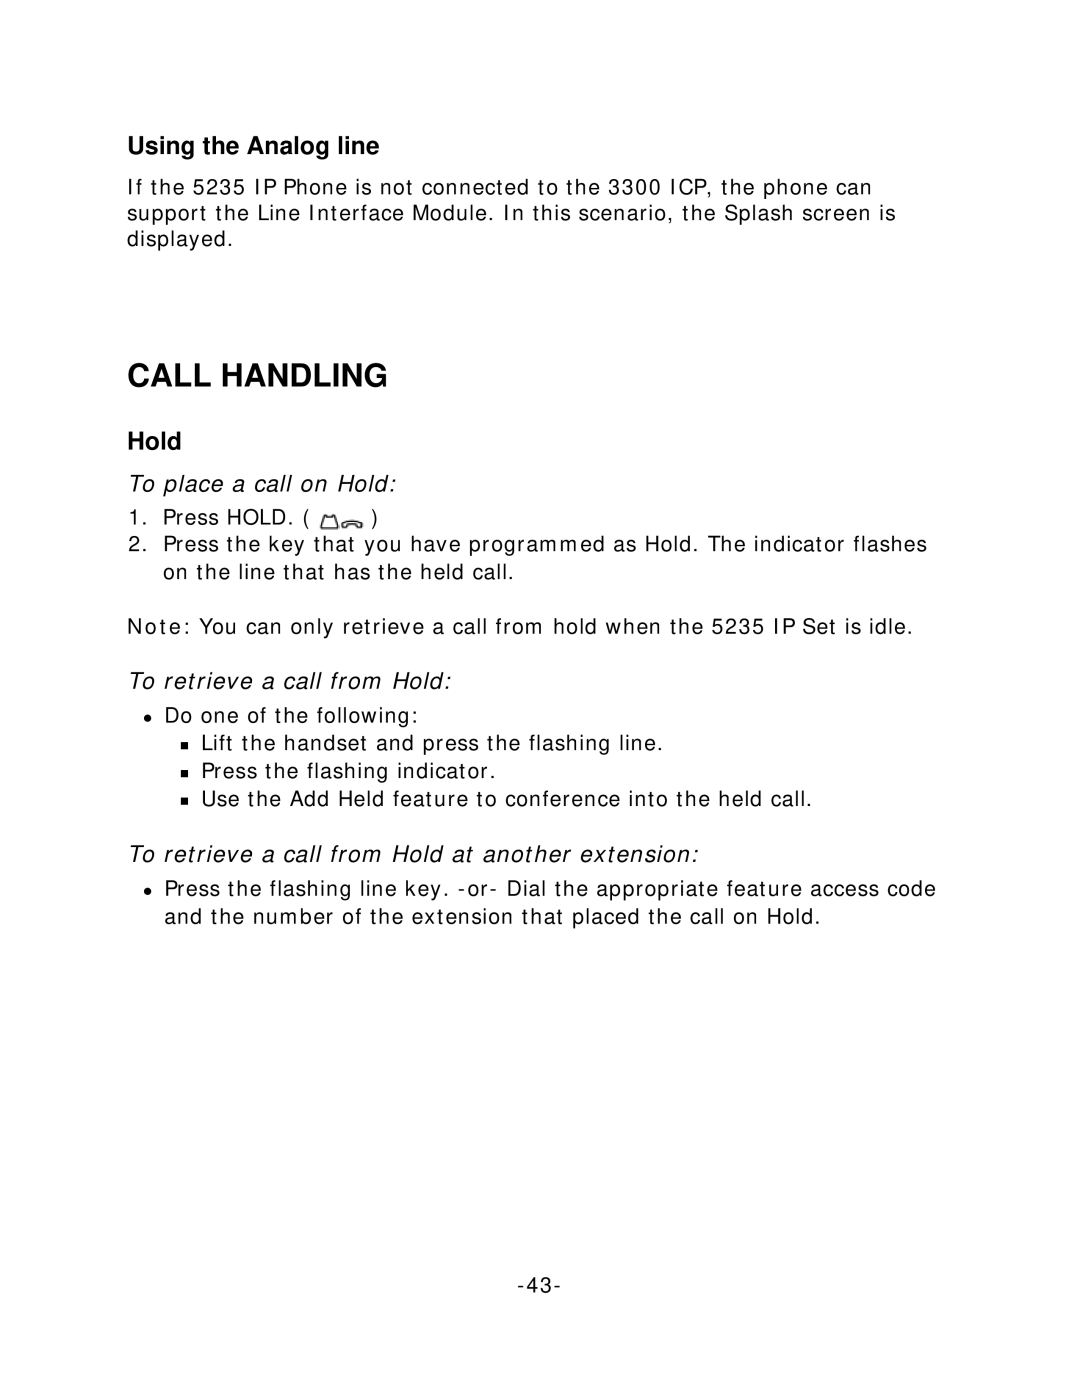 Mitel 5235 manual Call Handling, Using the Analog line, To place a call on Hold, To retrieve a call from Hold 